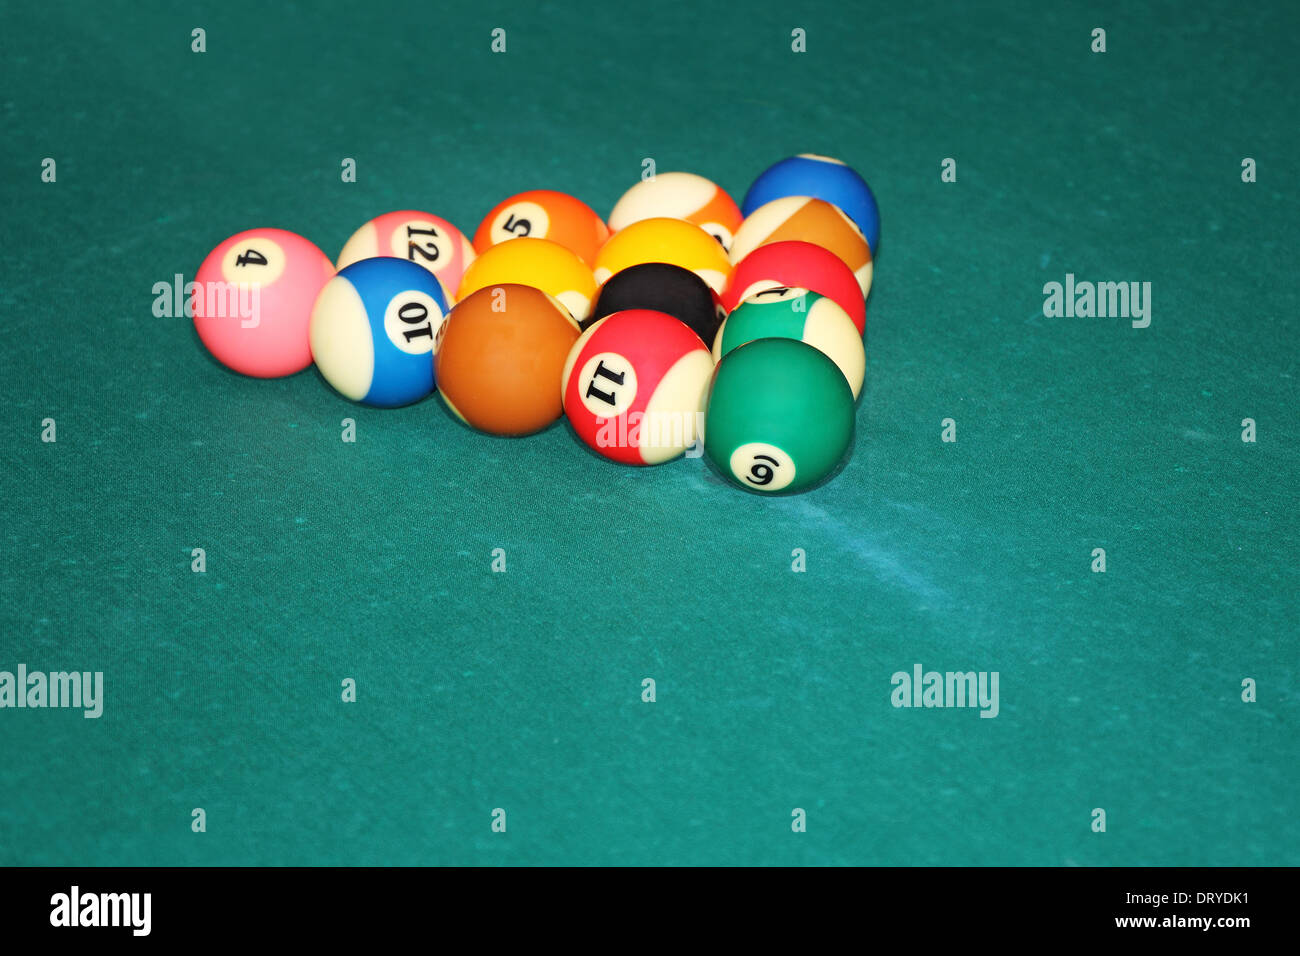 Billiards balls in triangle on the green cloth table Stock Photo